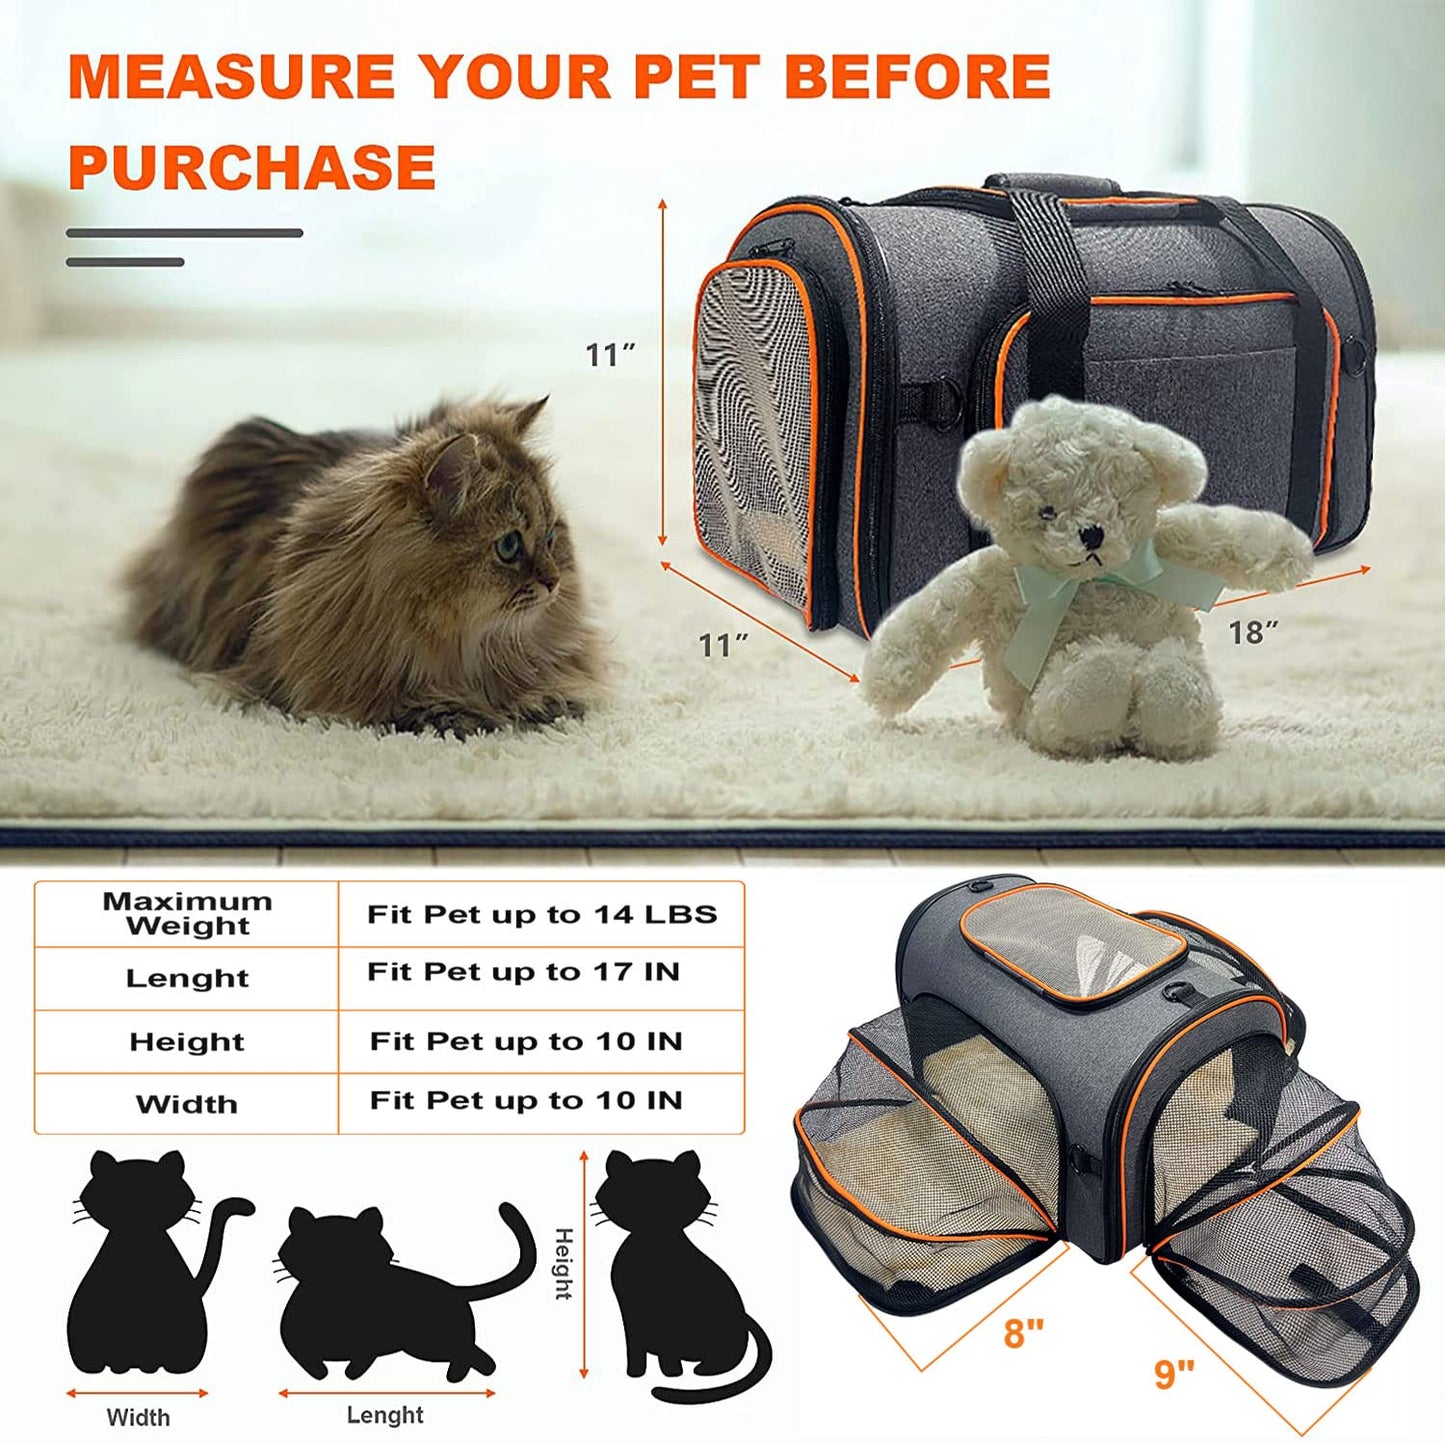 Cat Carrier, 3 Sides Expandable Foldable Pet Carrier for Medium Cat Small Dog, Airline Approved Soft-Sided Pet Travel Carrier Bag with Fleece Pad and Foldable Bowl